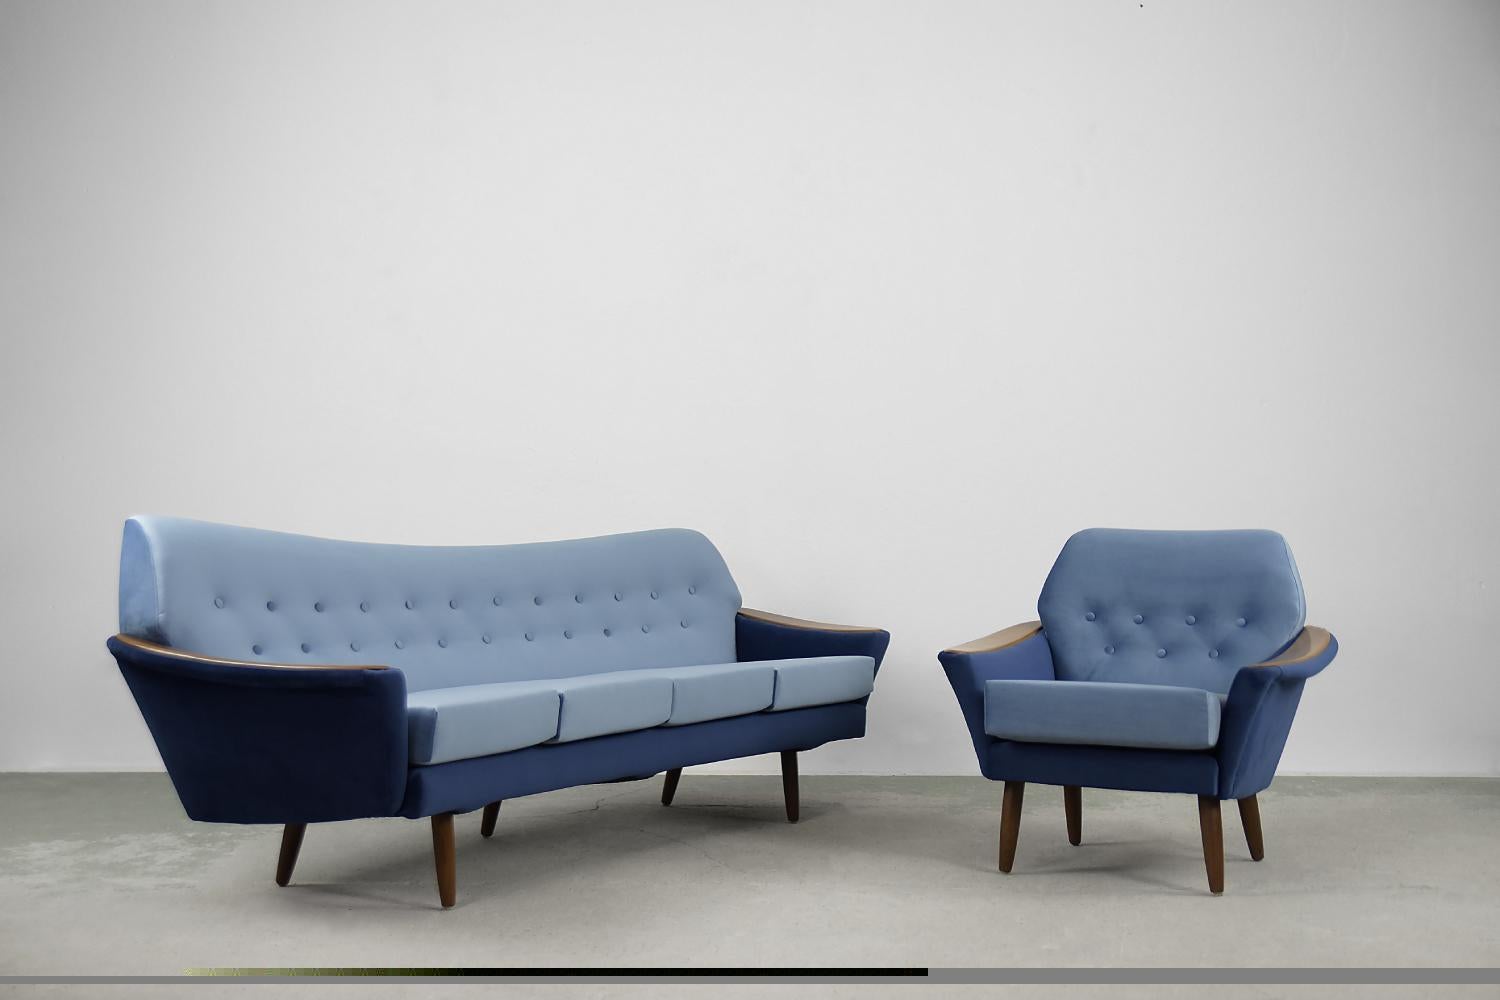 Vintage Scandinavian Modern Velvet Living Room Set by Holm Fabriker Ab, 1960s In Good Condition For Sale In Warszawa, Mazowieckie